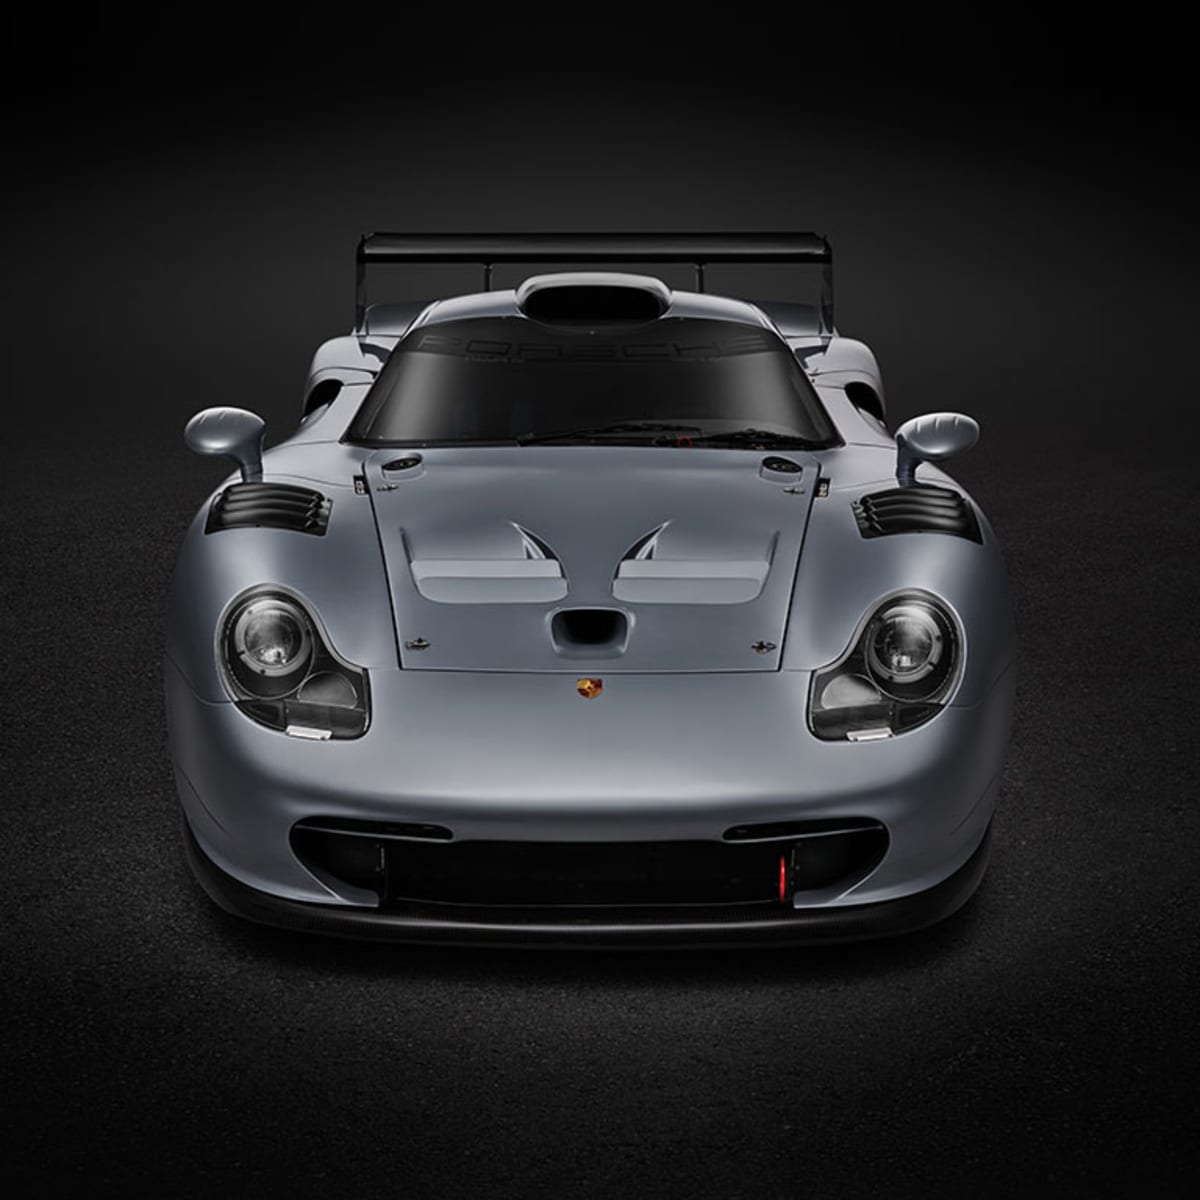 Say Hello To The Only Known Road Registered Porsche 911 GT1 Evolution In Existence